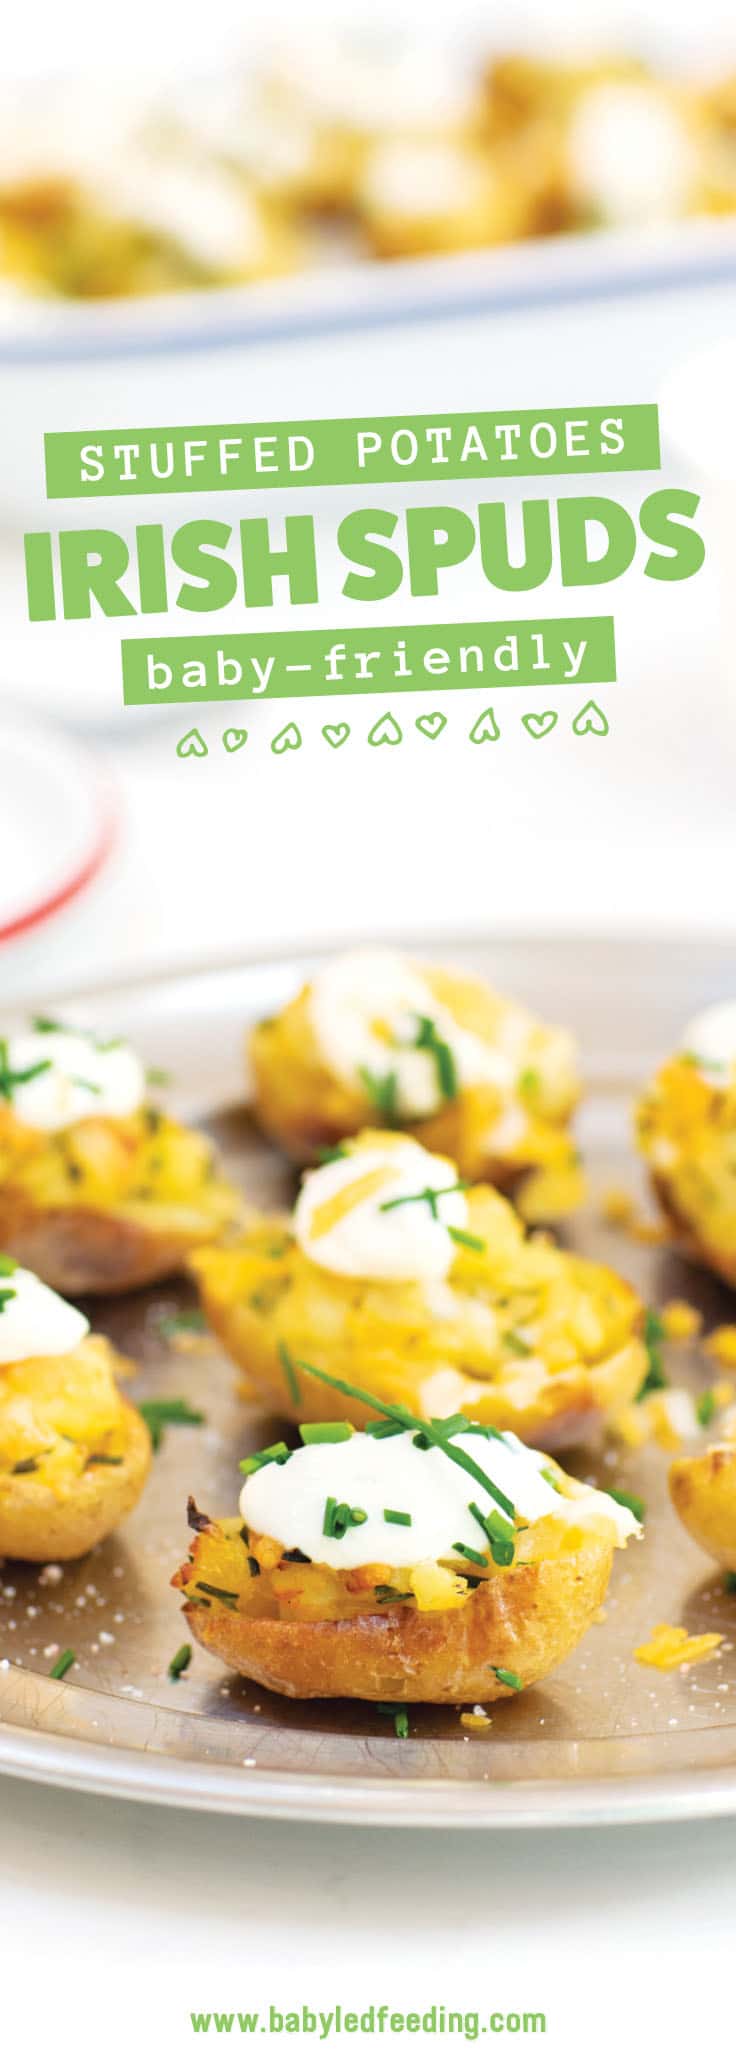 Baby Irish potato bites are an easy appetizer recipe for St. Patrick's Day! Bite sized baby potatoes loaded with a yummy filling topped with a dollop of sour cream or Greek yogurt. #babyledweaning #fingerfood #saintpatricksday #potatoes